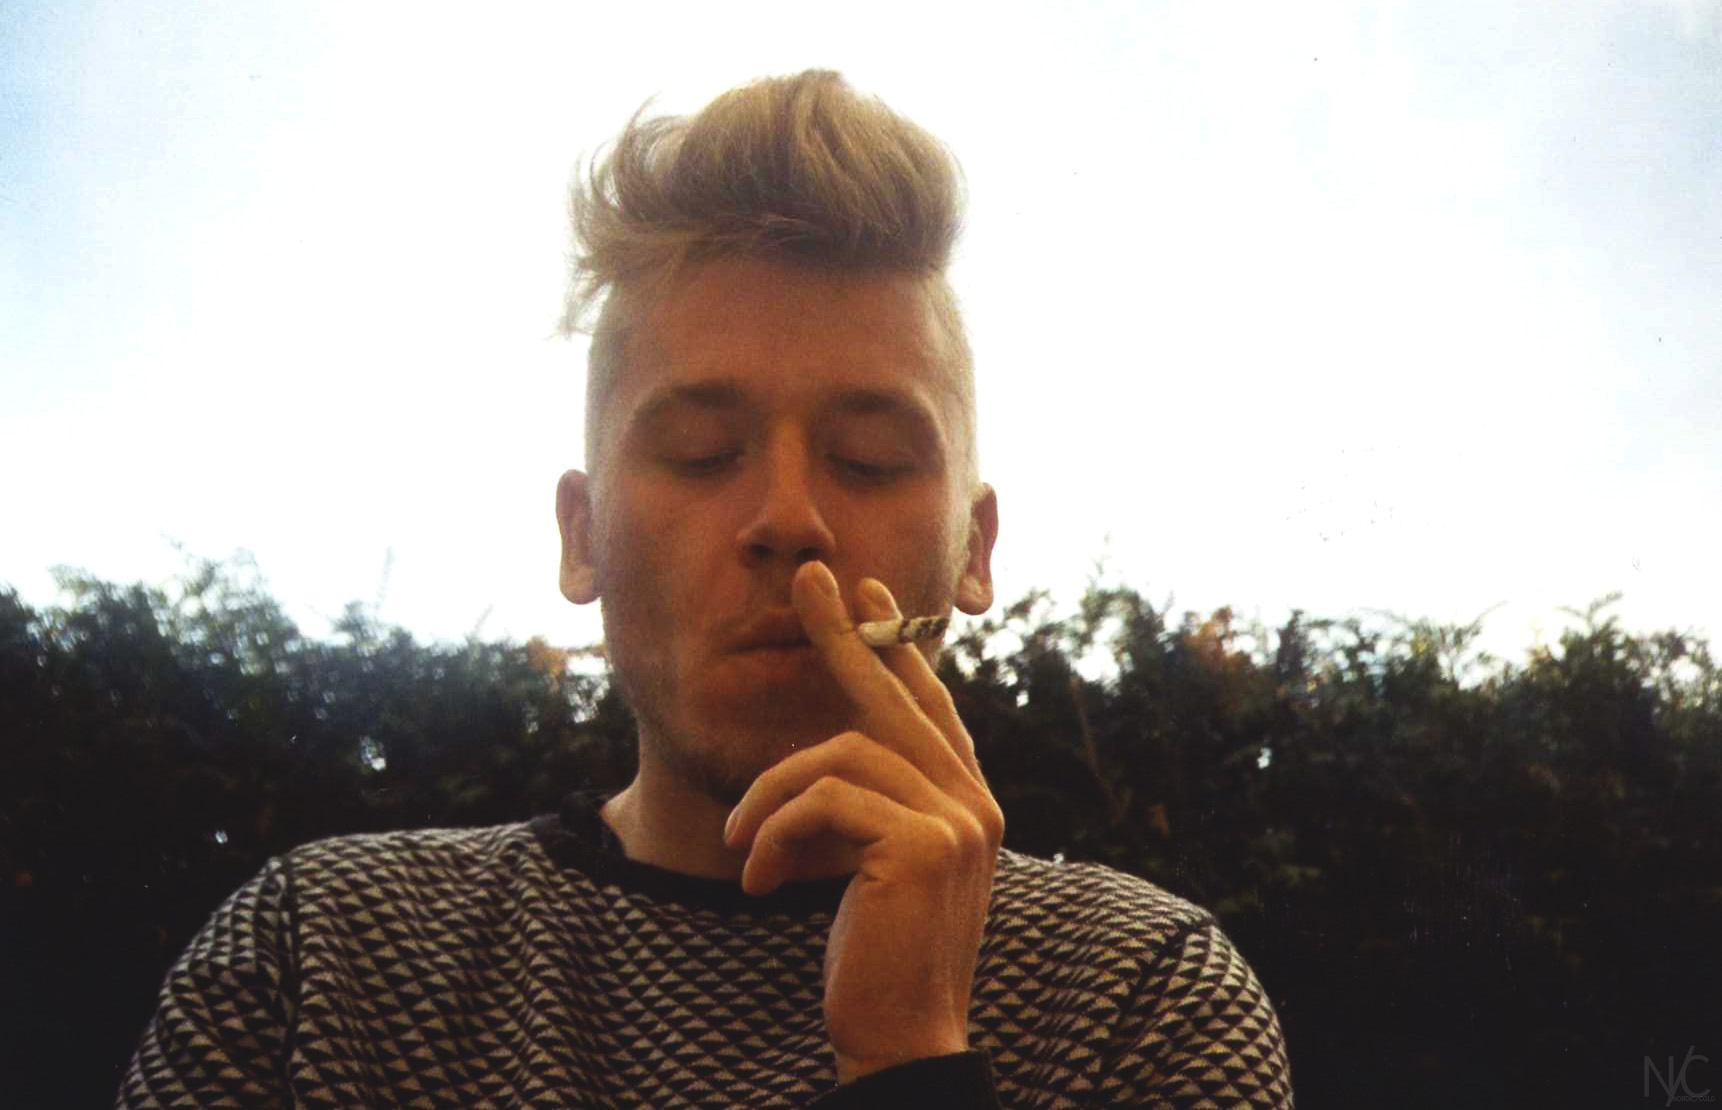 a man is smoking a cigarette outside by some bushes